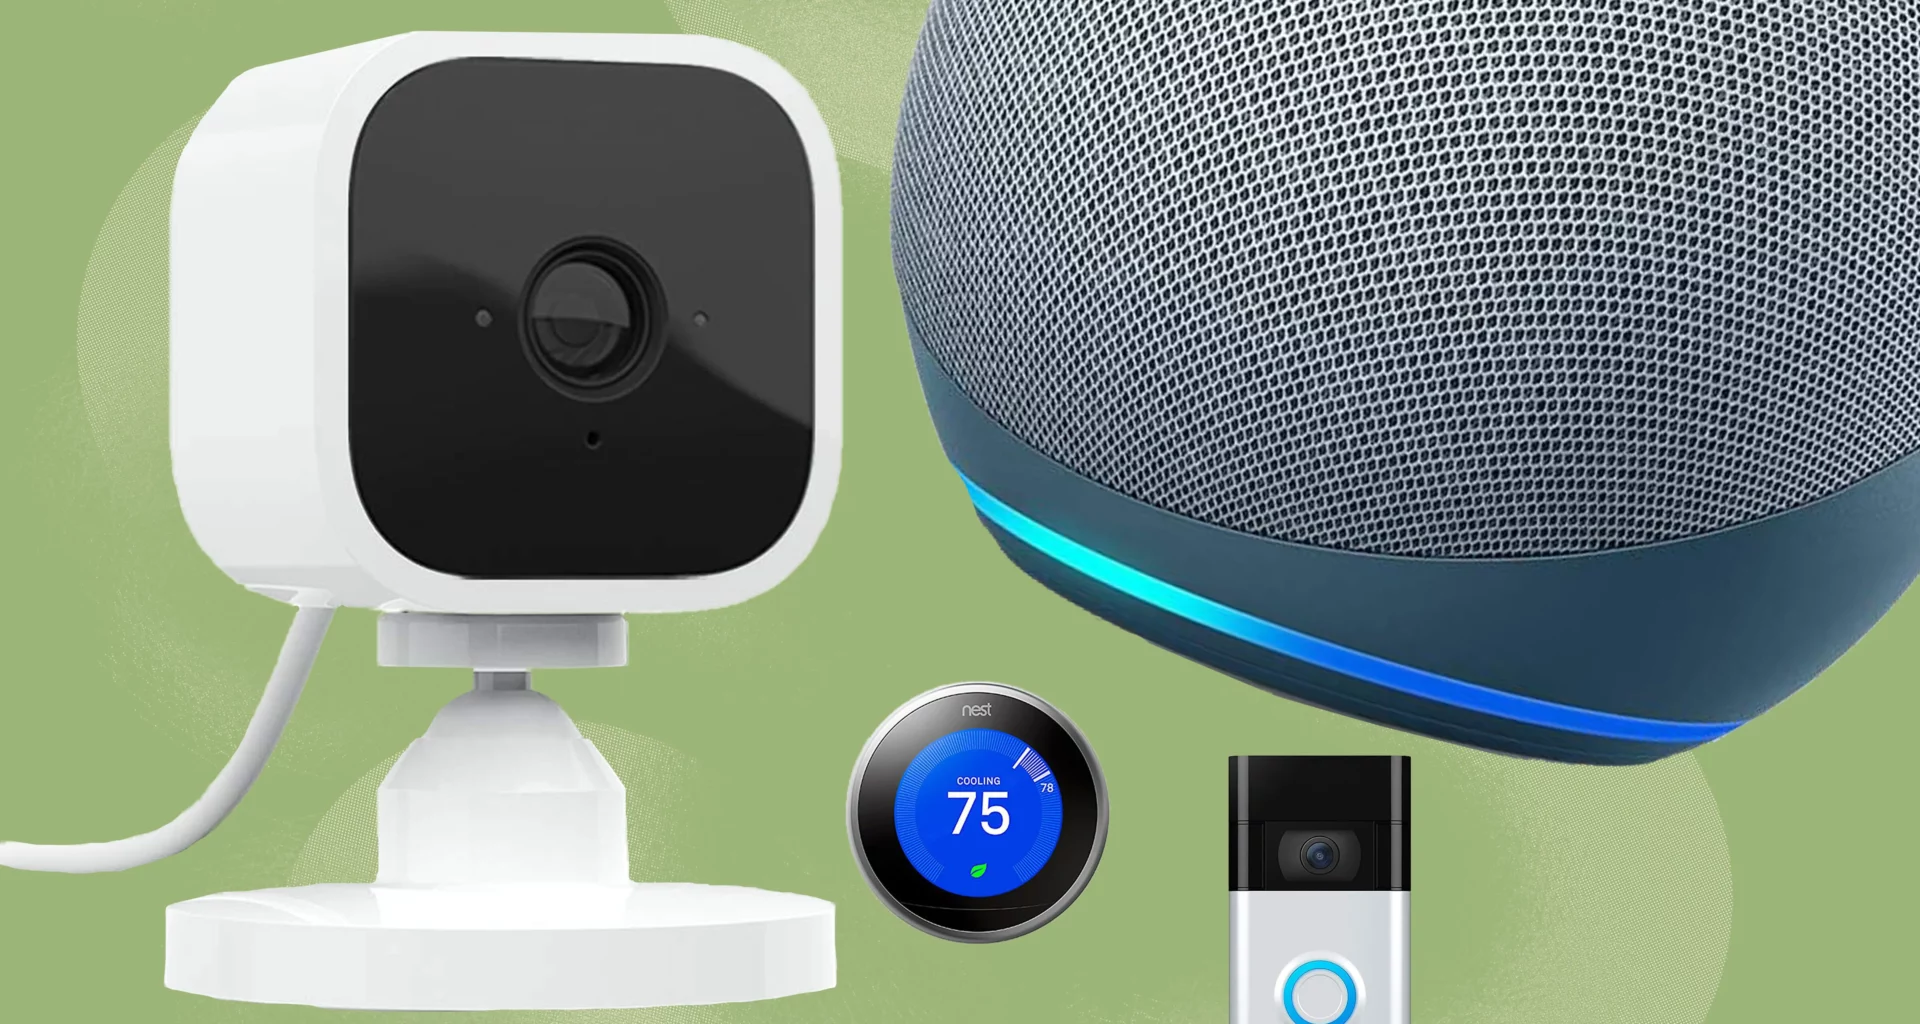 5 Smart Home Devices That Will Make Your Life Easier